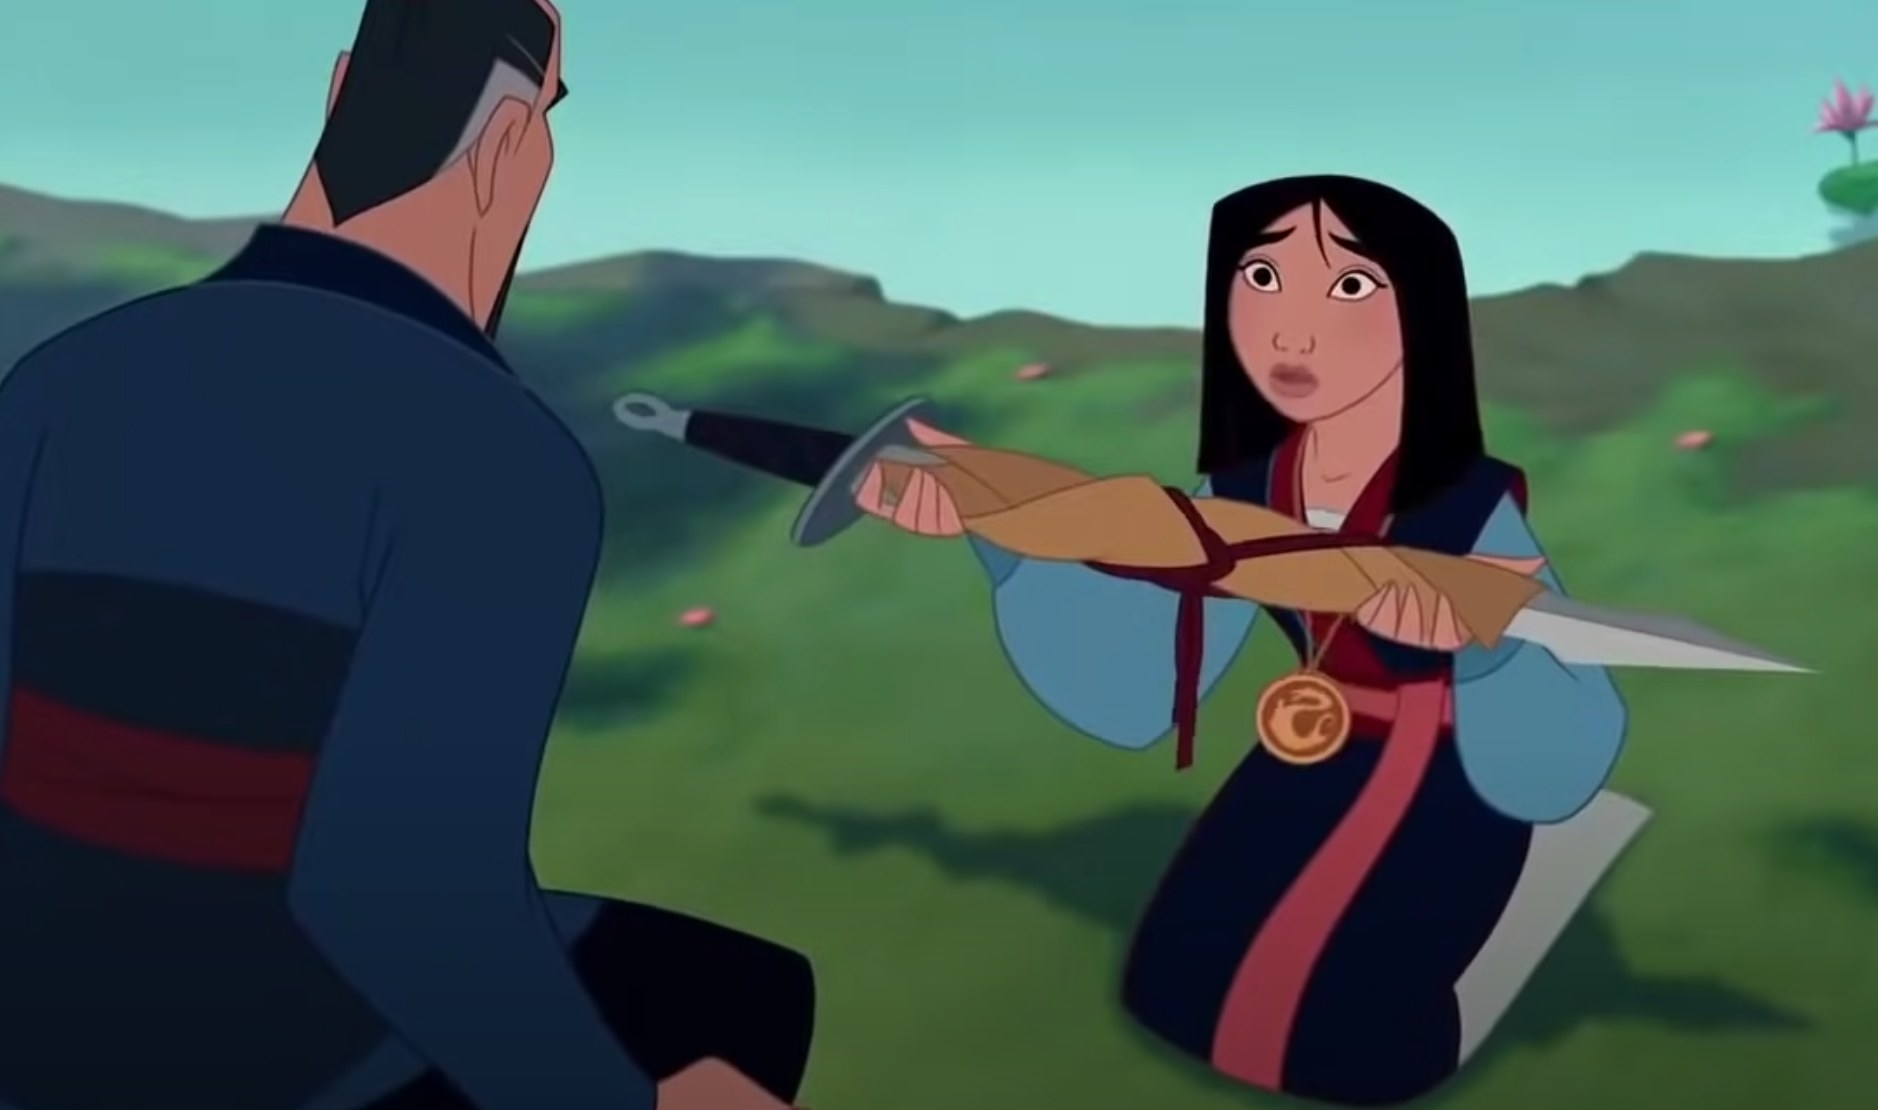 Mulan presenting the sword to her father